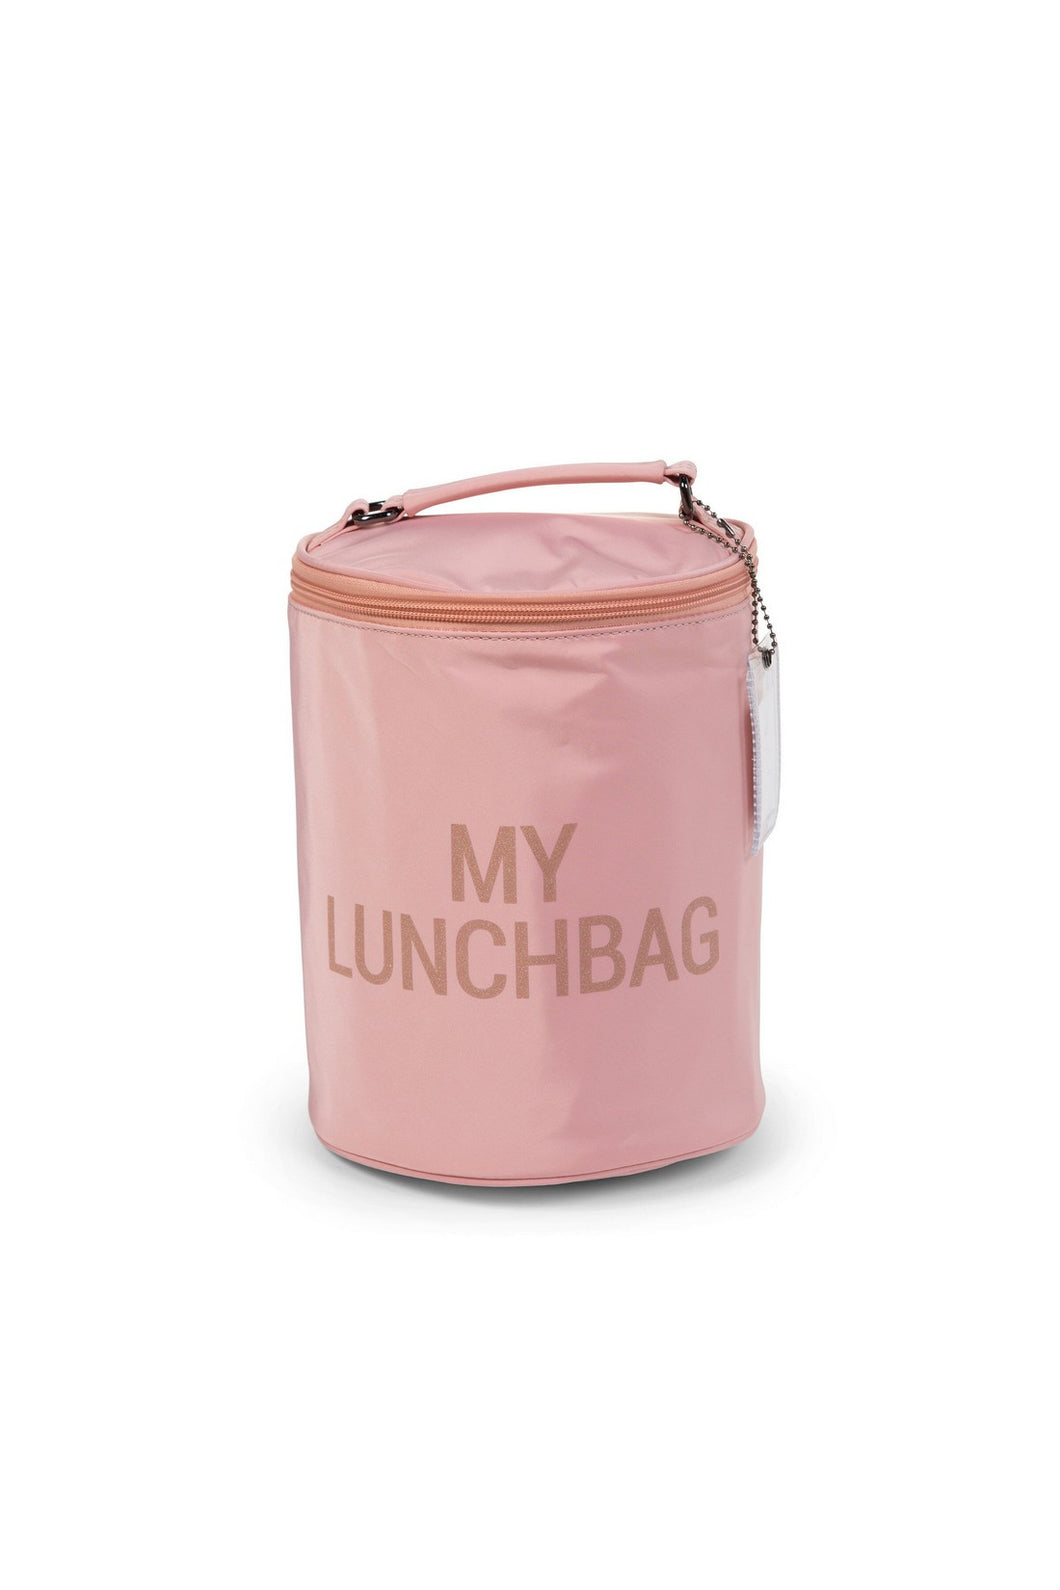 Childhome My Lunchbag - With Insulation Lining - Pink Copper